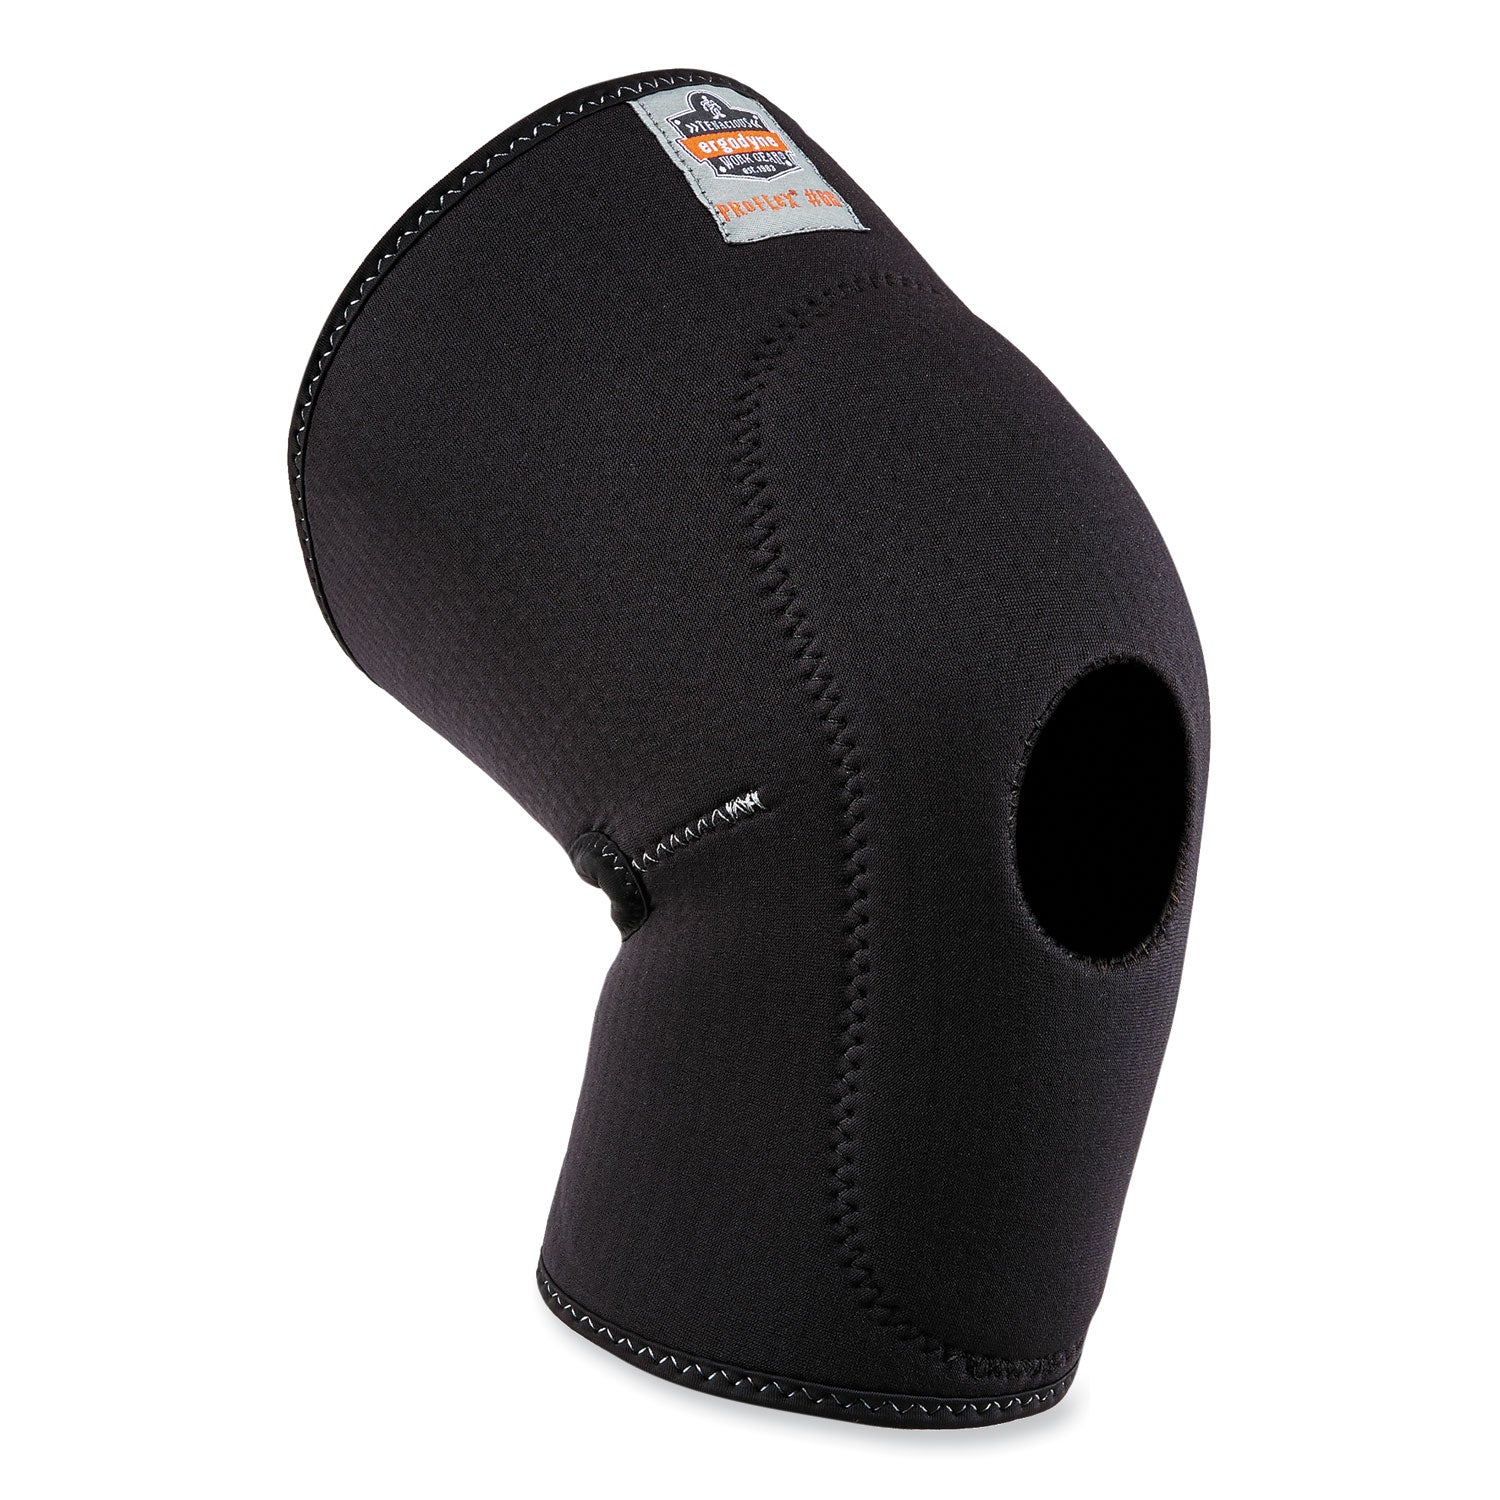 proflex-615-open-patella-anterior-pad-knee-sleeve-large-black-ships-in-1-3-business-days_ego16534 - 1